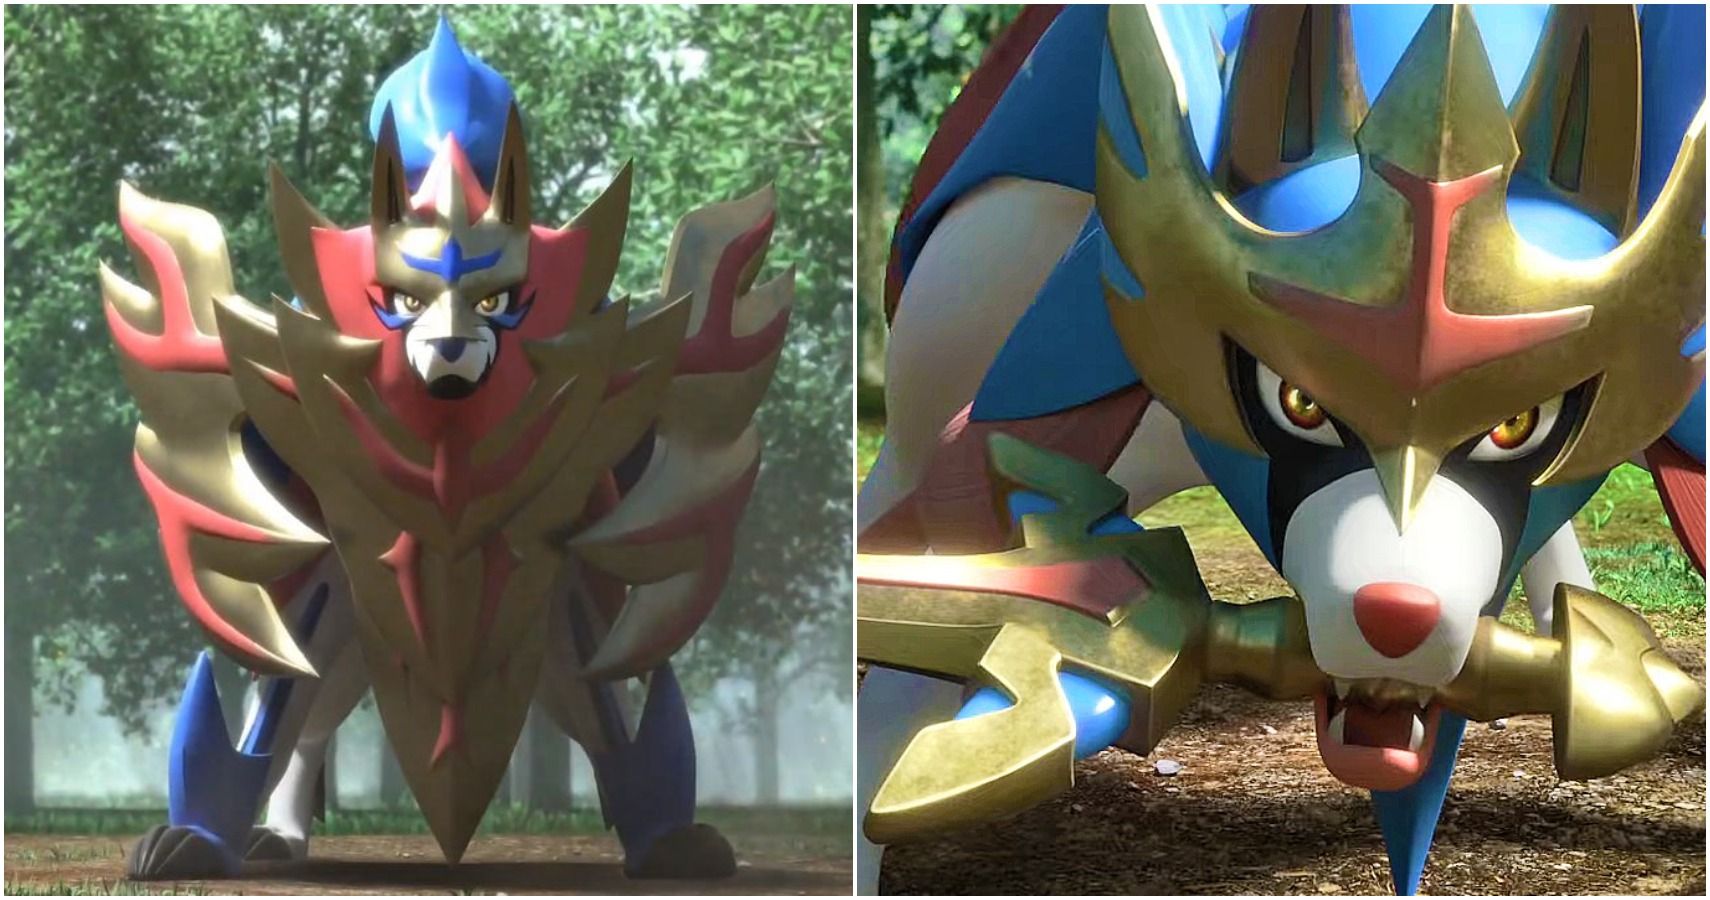 Pokemon Sword vs Shield: Which one should you buy?